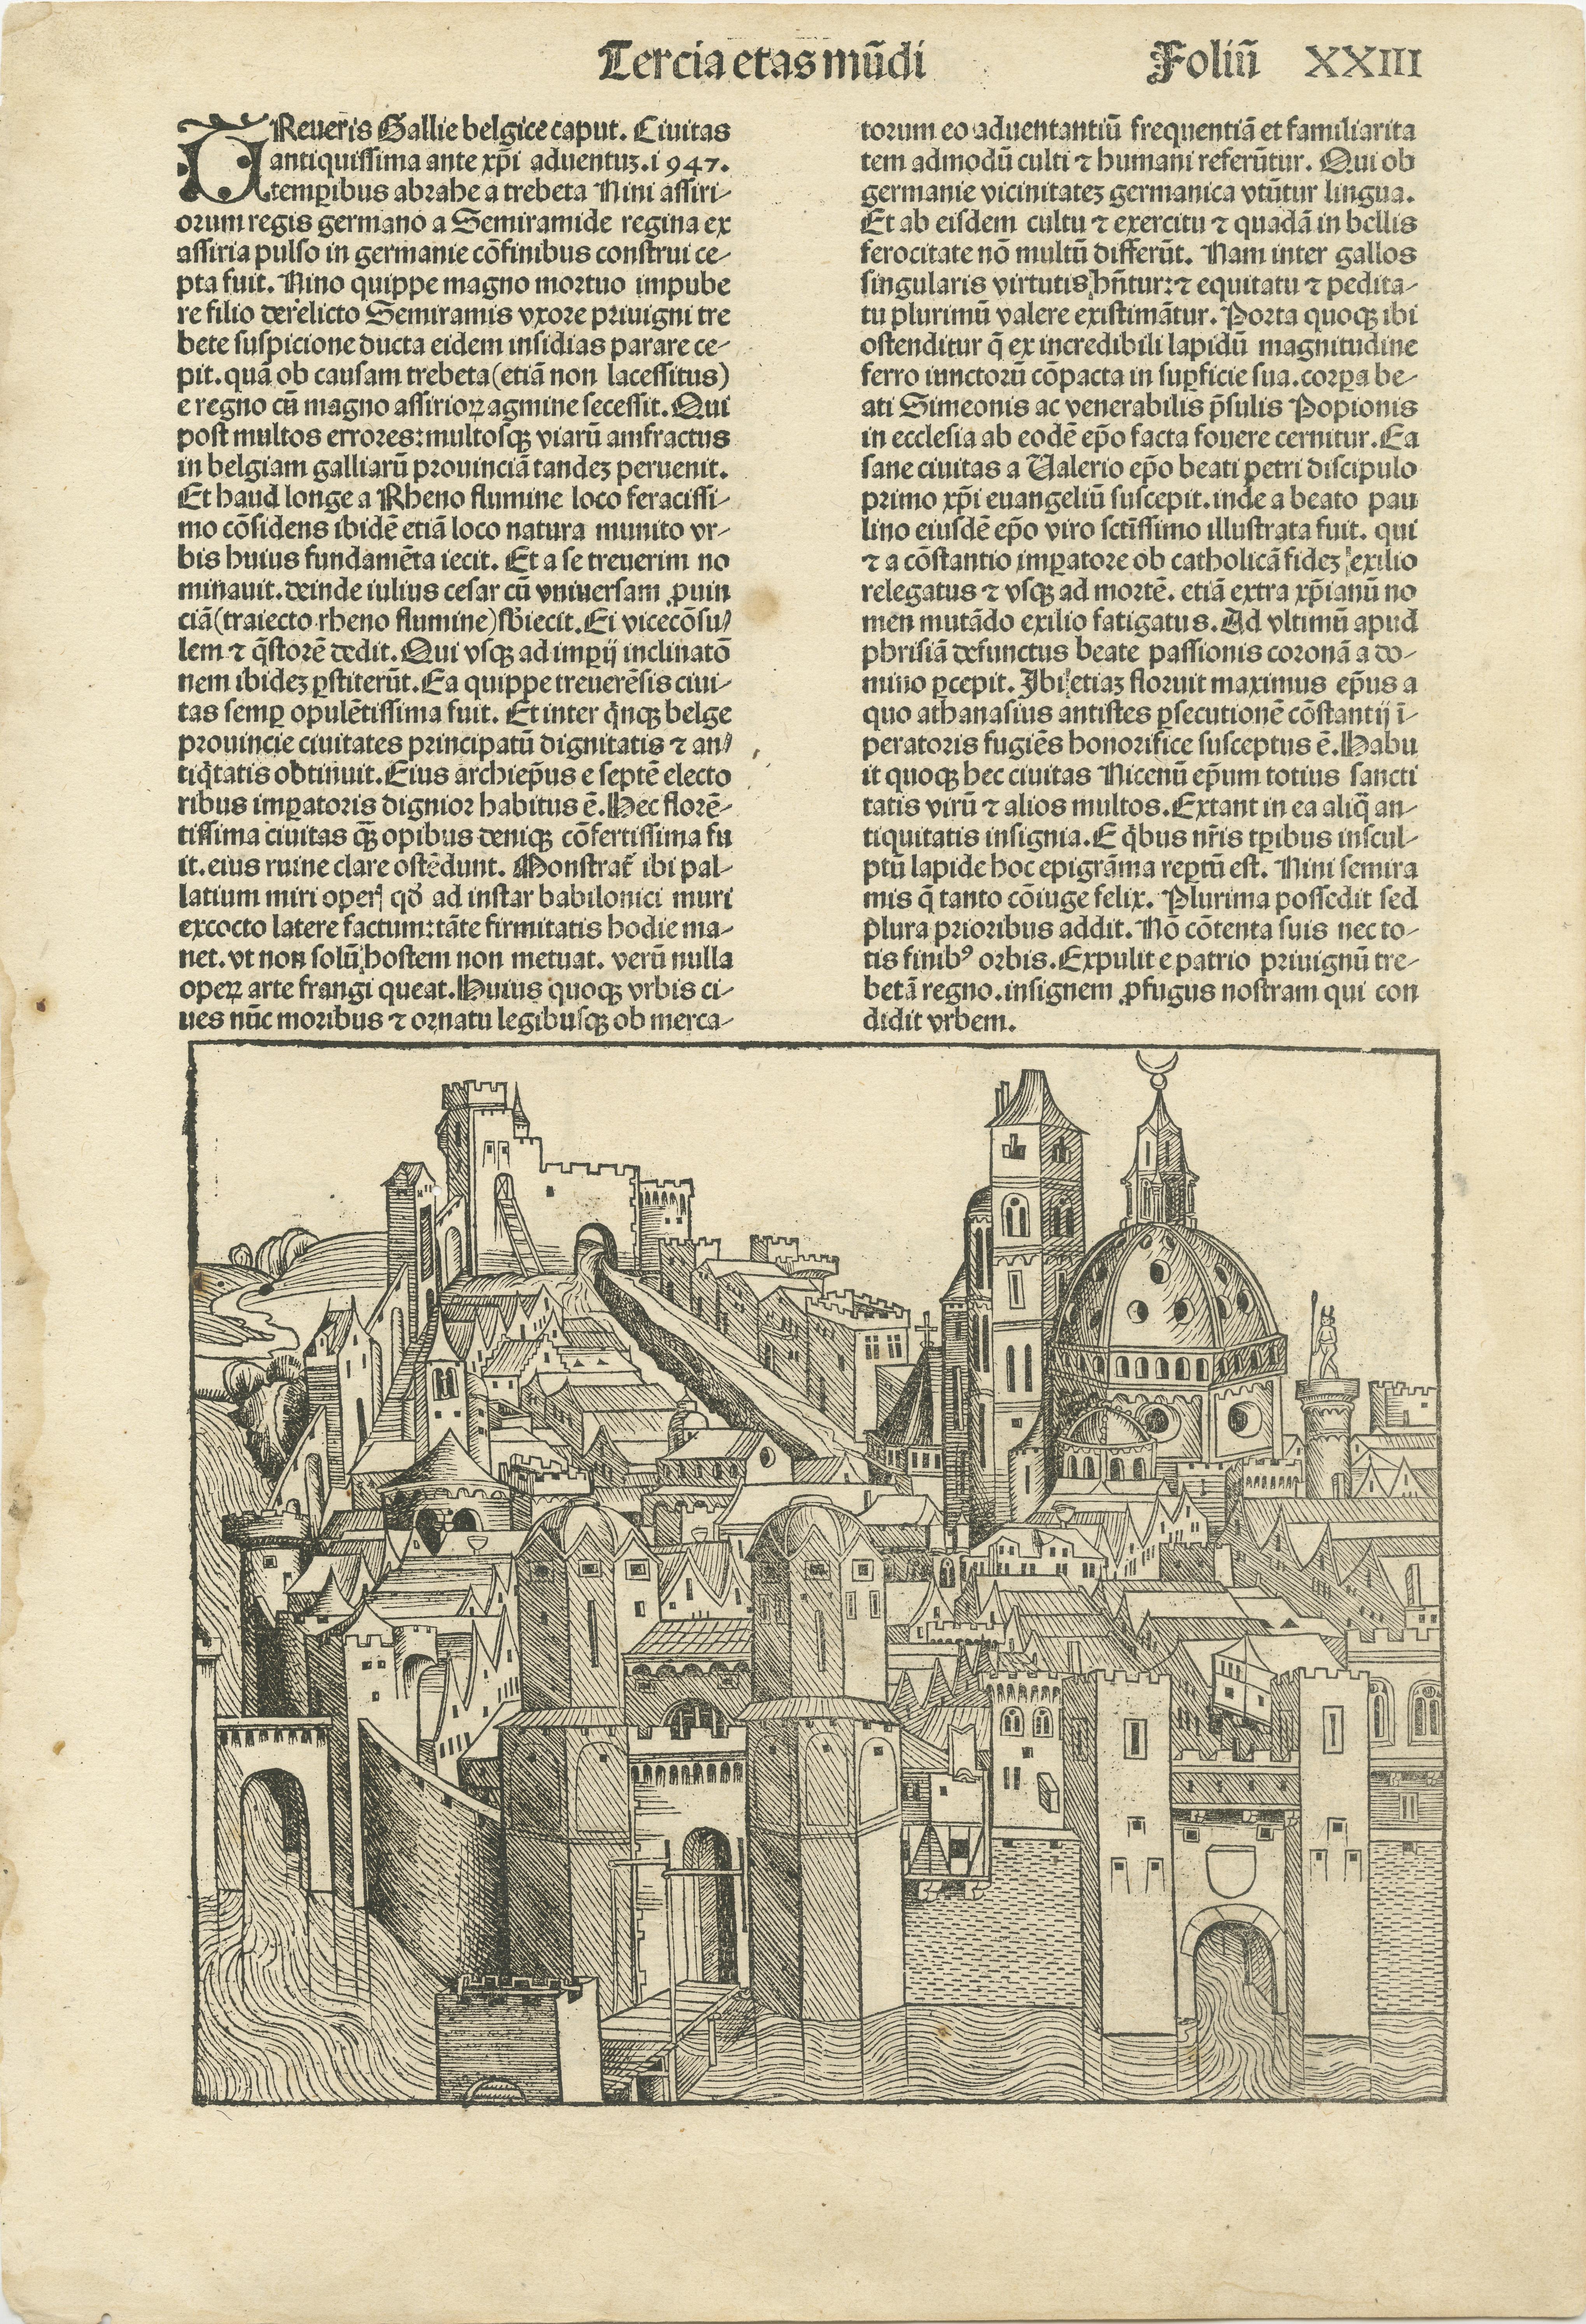 Very early woodcut of Damascus and Trier. An individual page of the 'Nuremberg Chronicle'. This work by Schedel (1440-1514) is an illustrated world history which is based on the Bible, which follows the story of human history related in the Bible